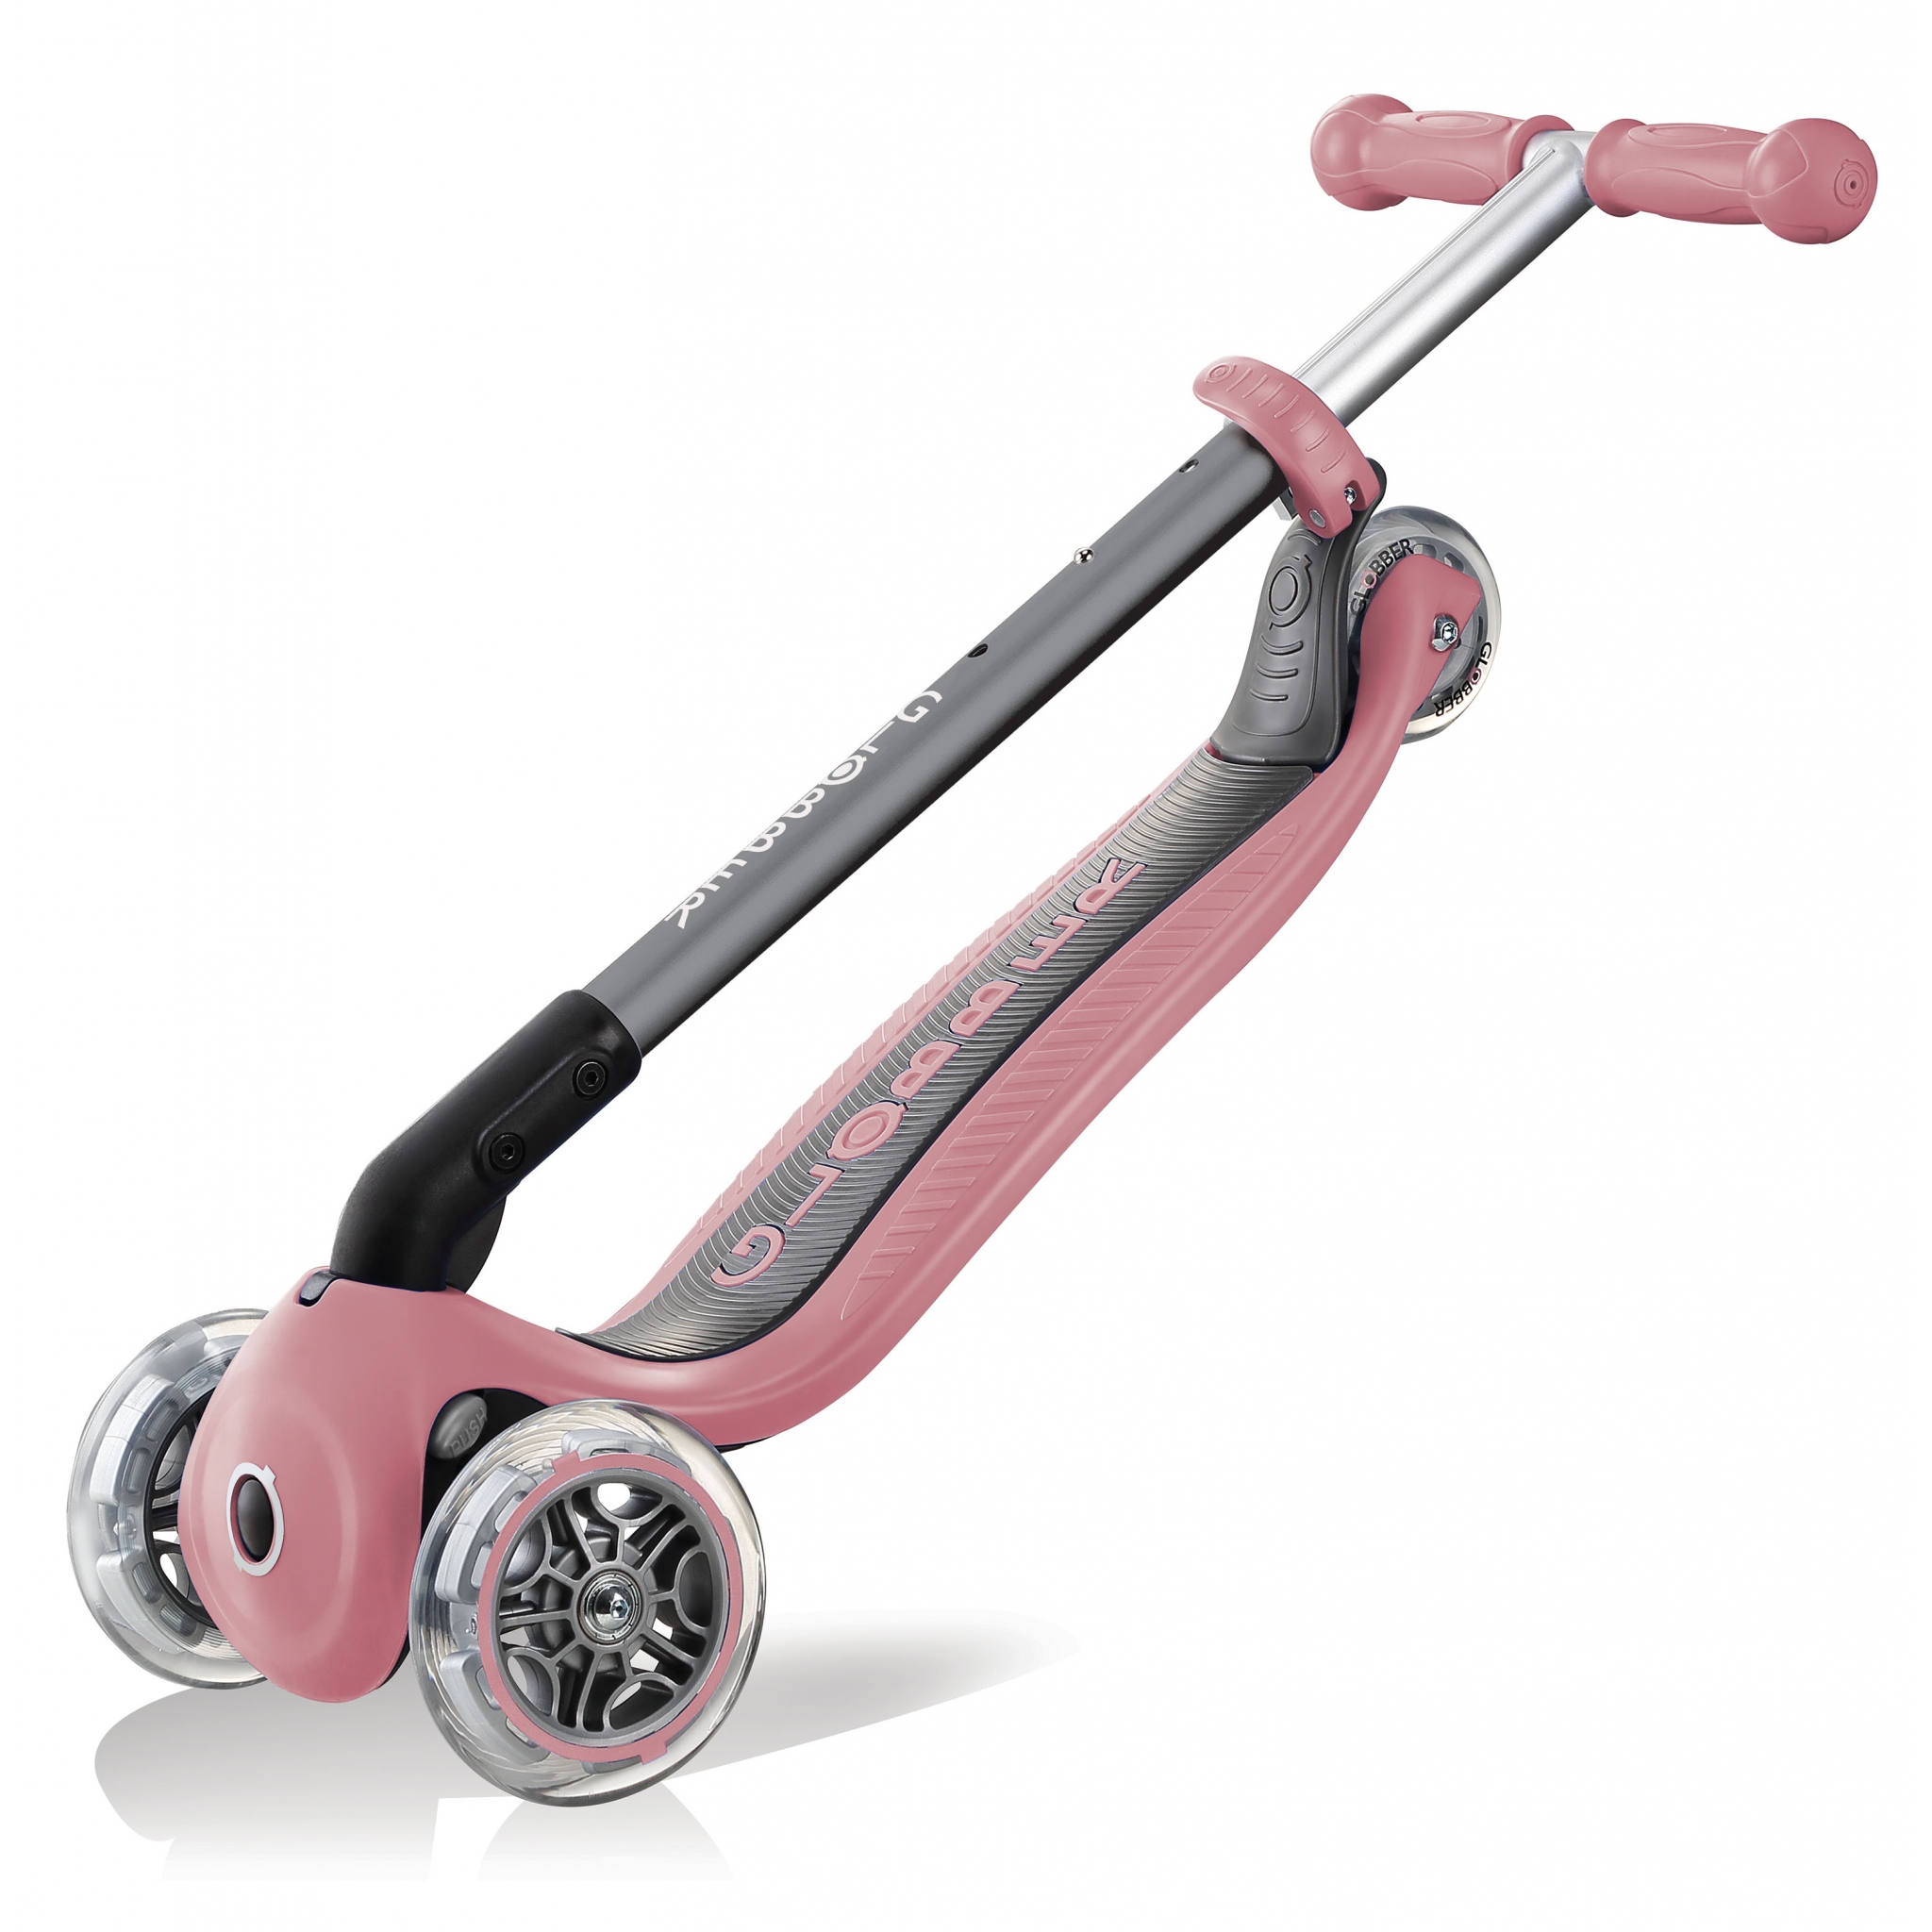 PRIMO-FOLDABLE-3-wheel-foldable-scooter-for-kids-trolley-mode-pastel-deep-pink 4